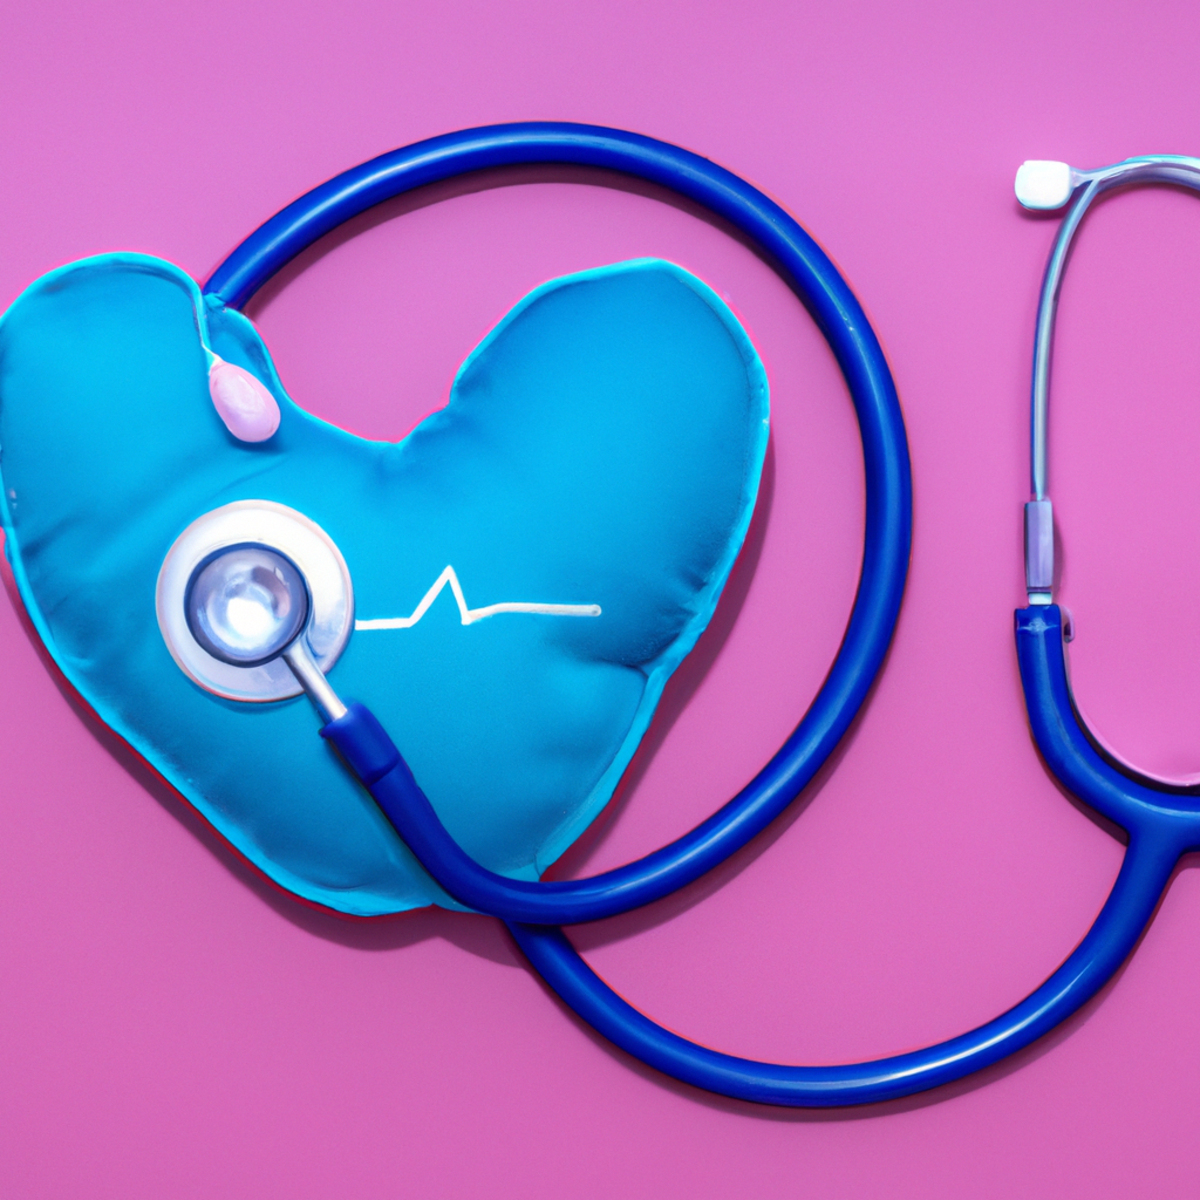 Stethoscope on heart-shaped pillow symbolizes HCM and pregnancy, highlighting medical aspect and love involved - Hypertrophic Cardiomyopathy (HCM)